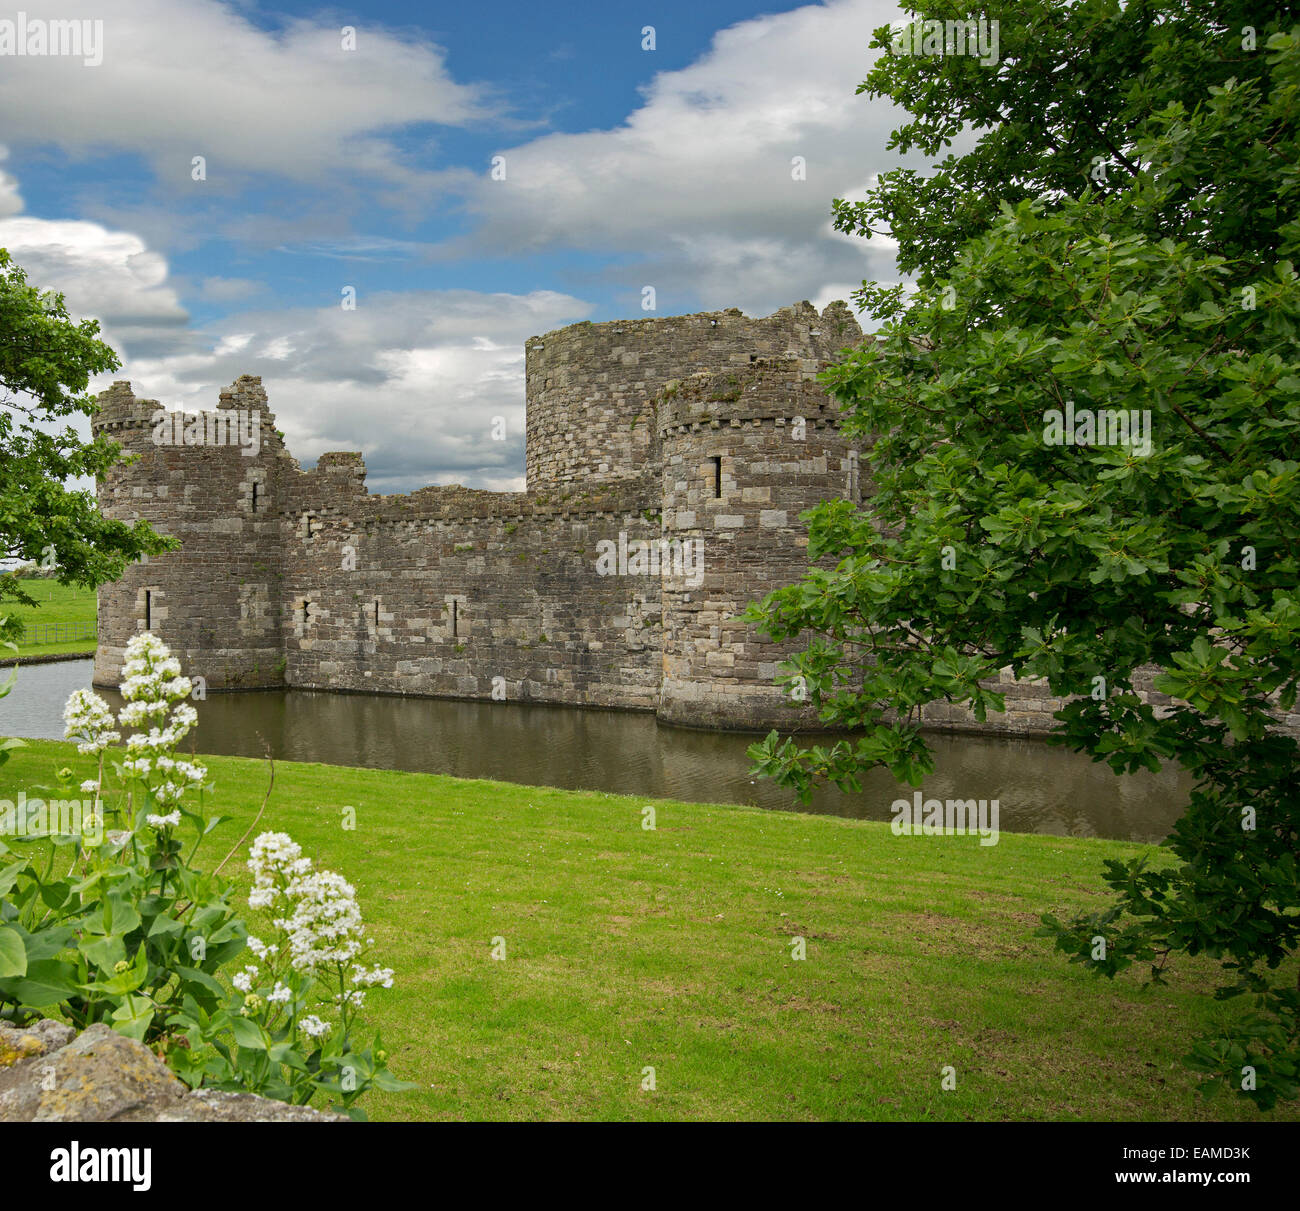 Exterior of spectacular 13th century Beaumaris castle with moat, emerald lawns, trees & white wildflowers under blue sky , Wales Stock Photo